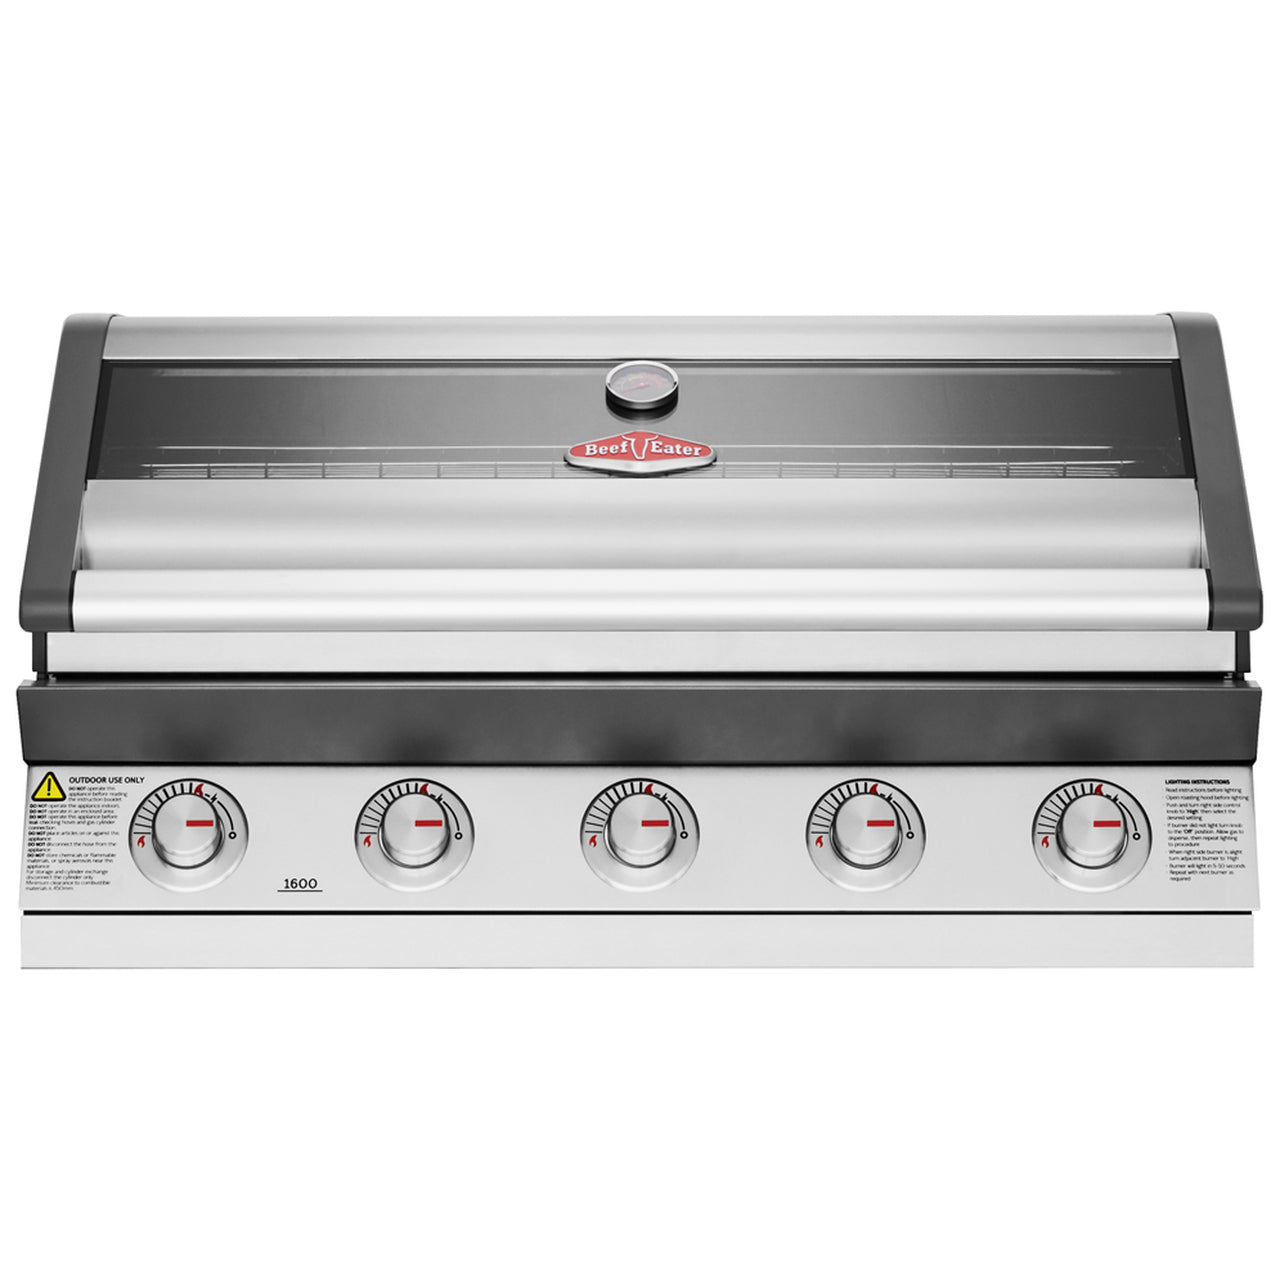 Beefeater 1600s Built-in 5 Burner Gas Bbq